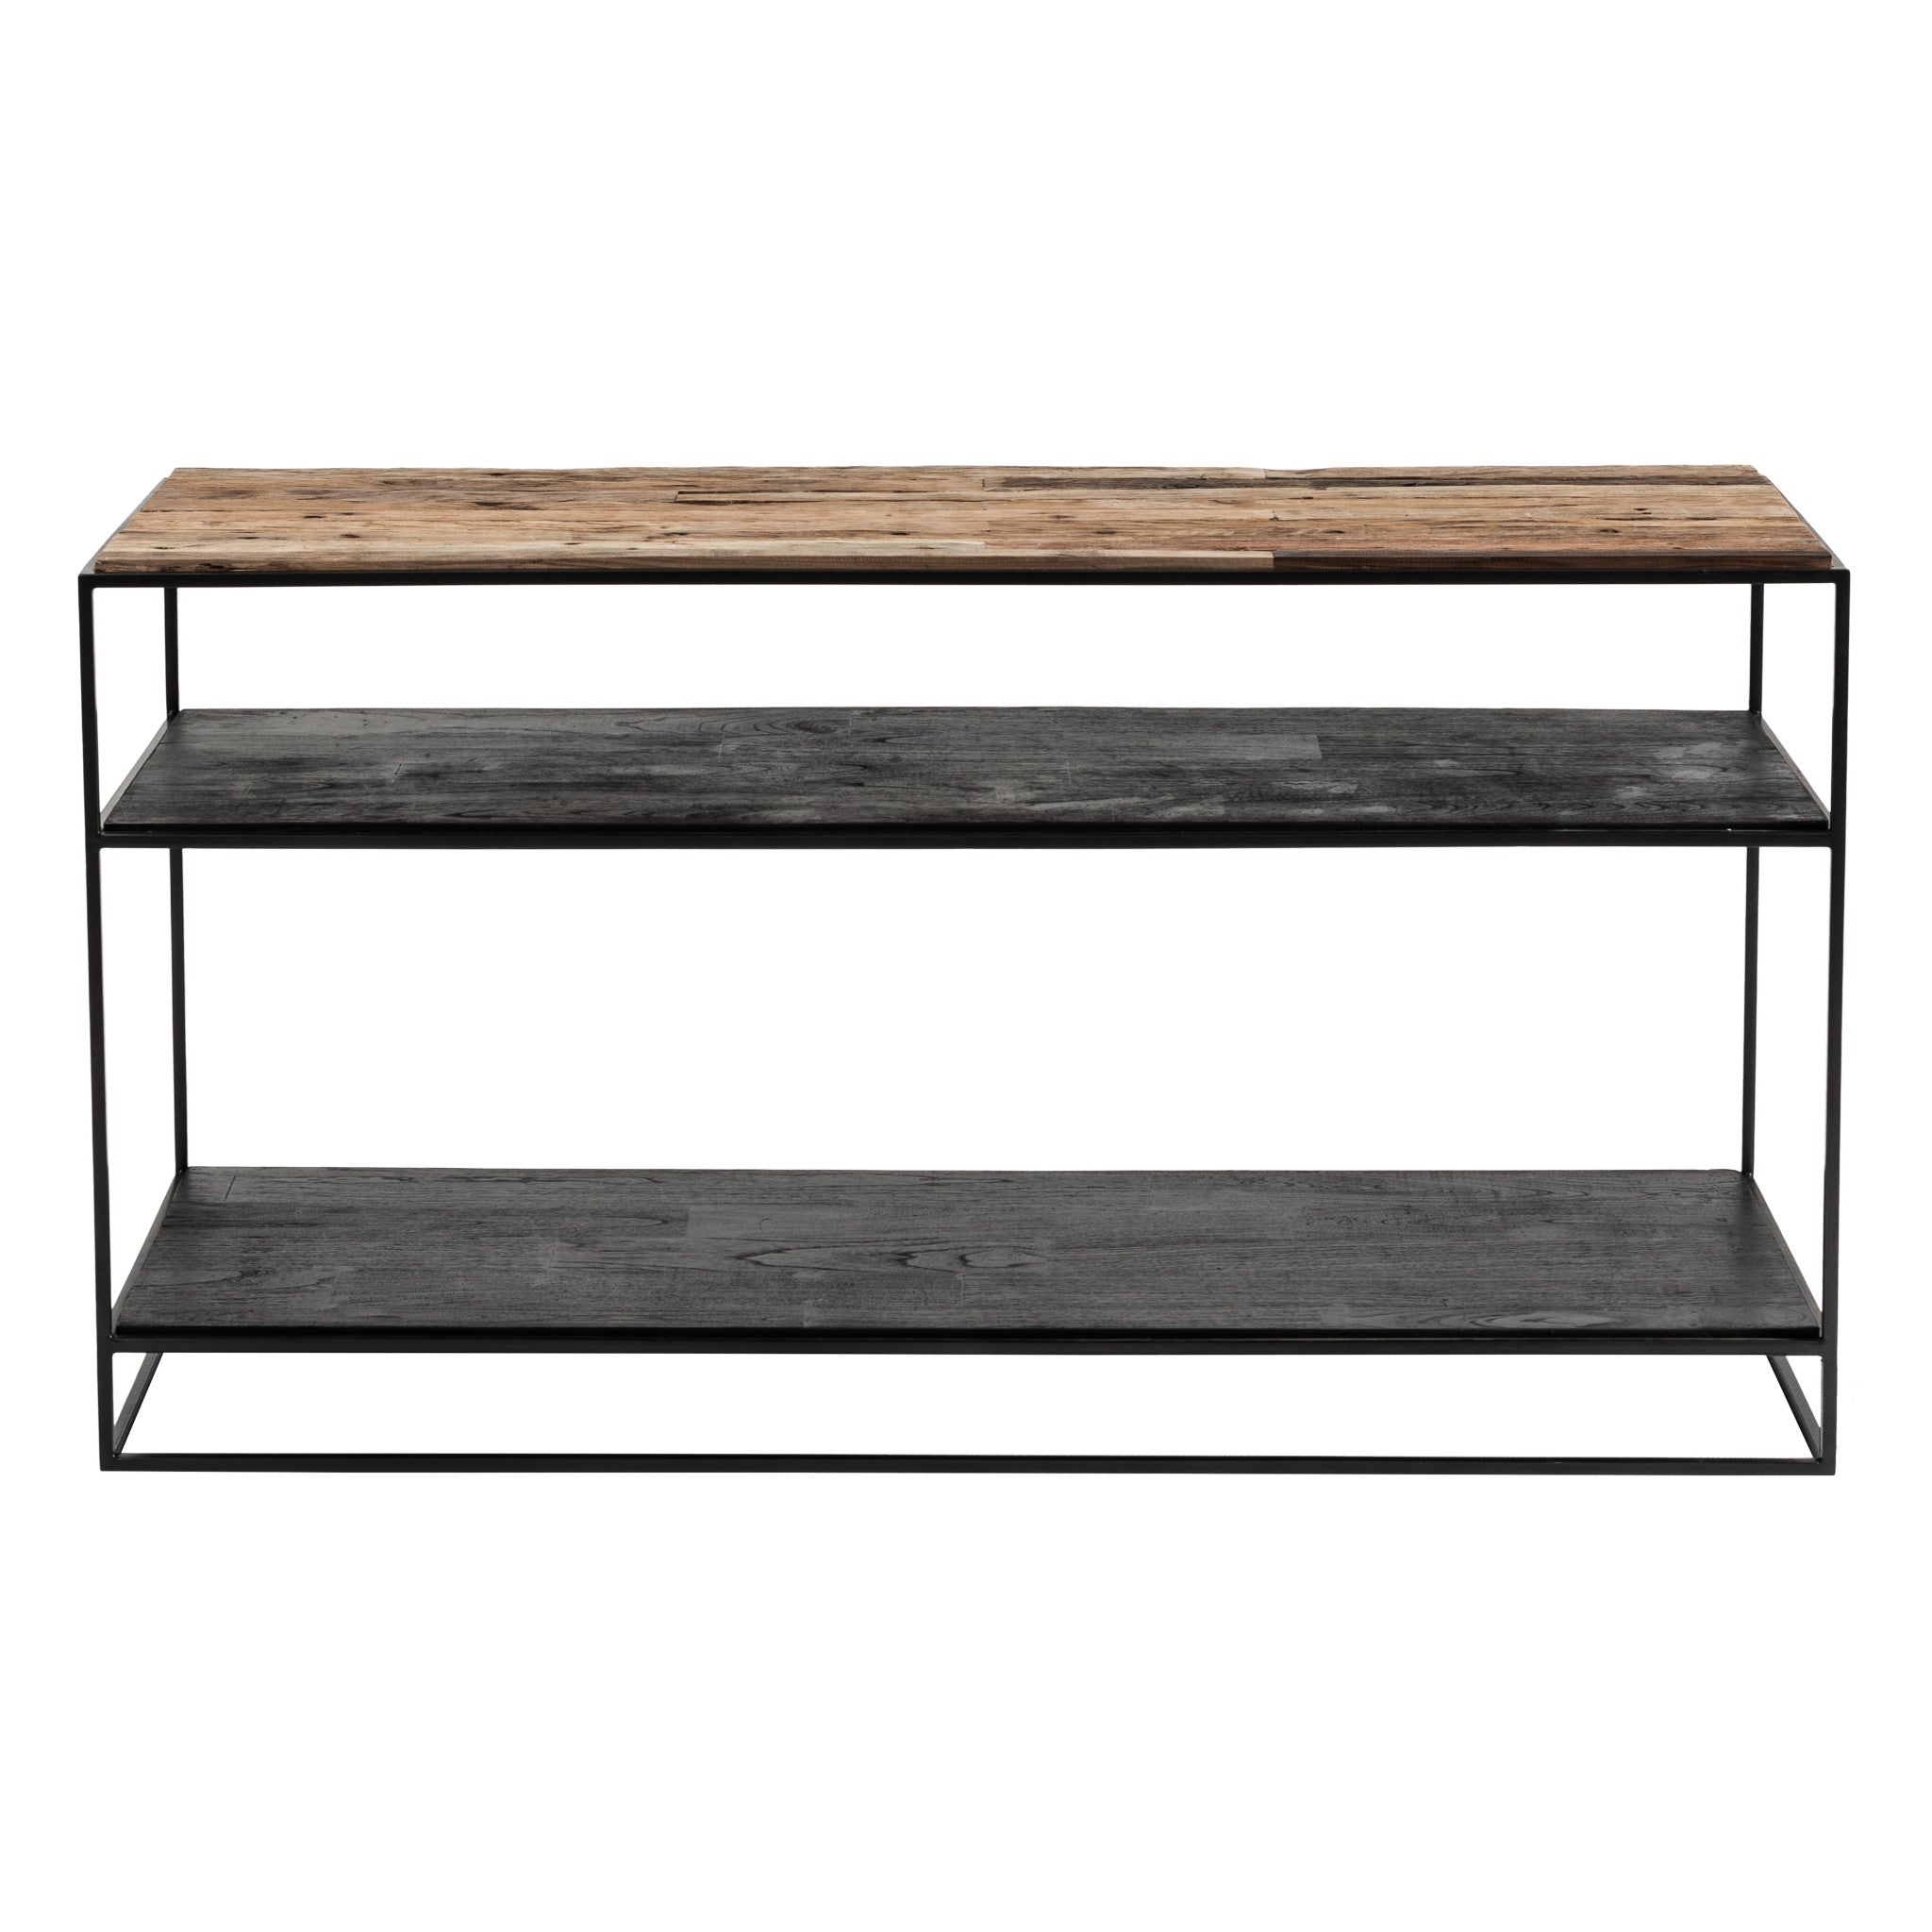 55" Natural and Black Frame Console Table With Storage